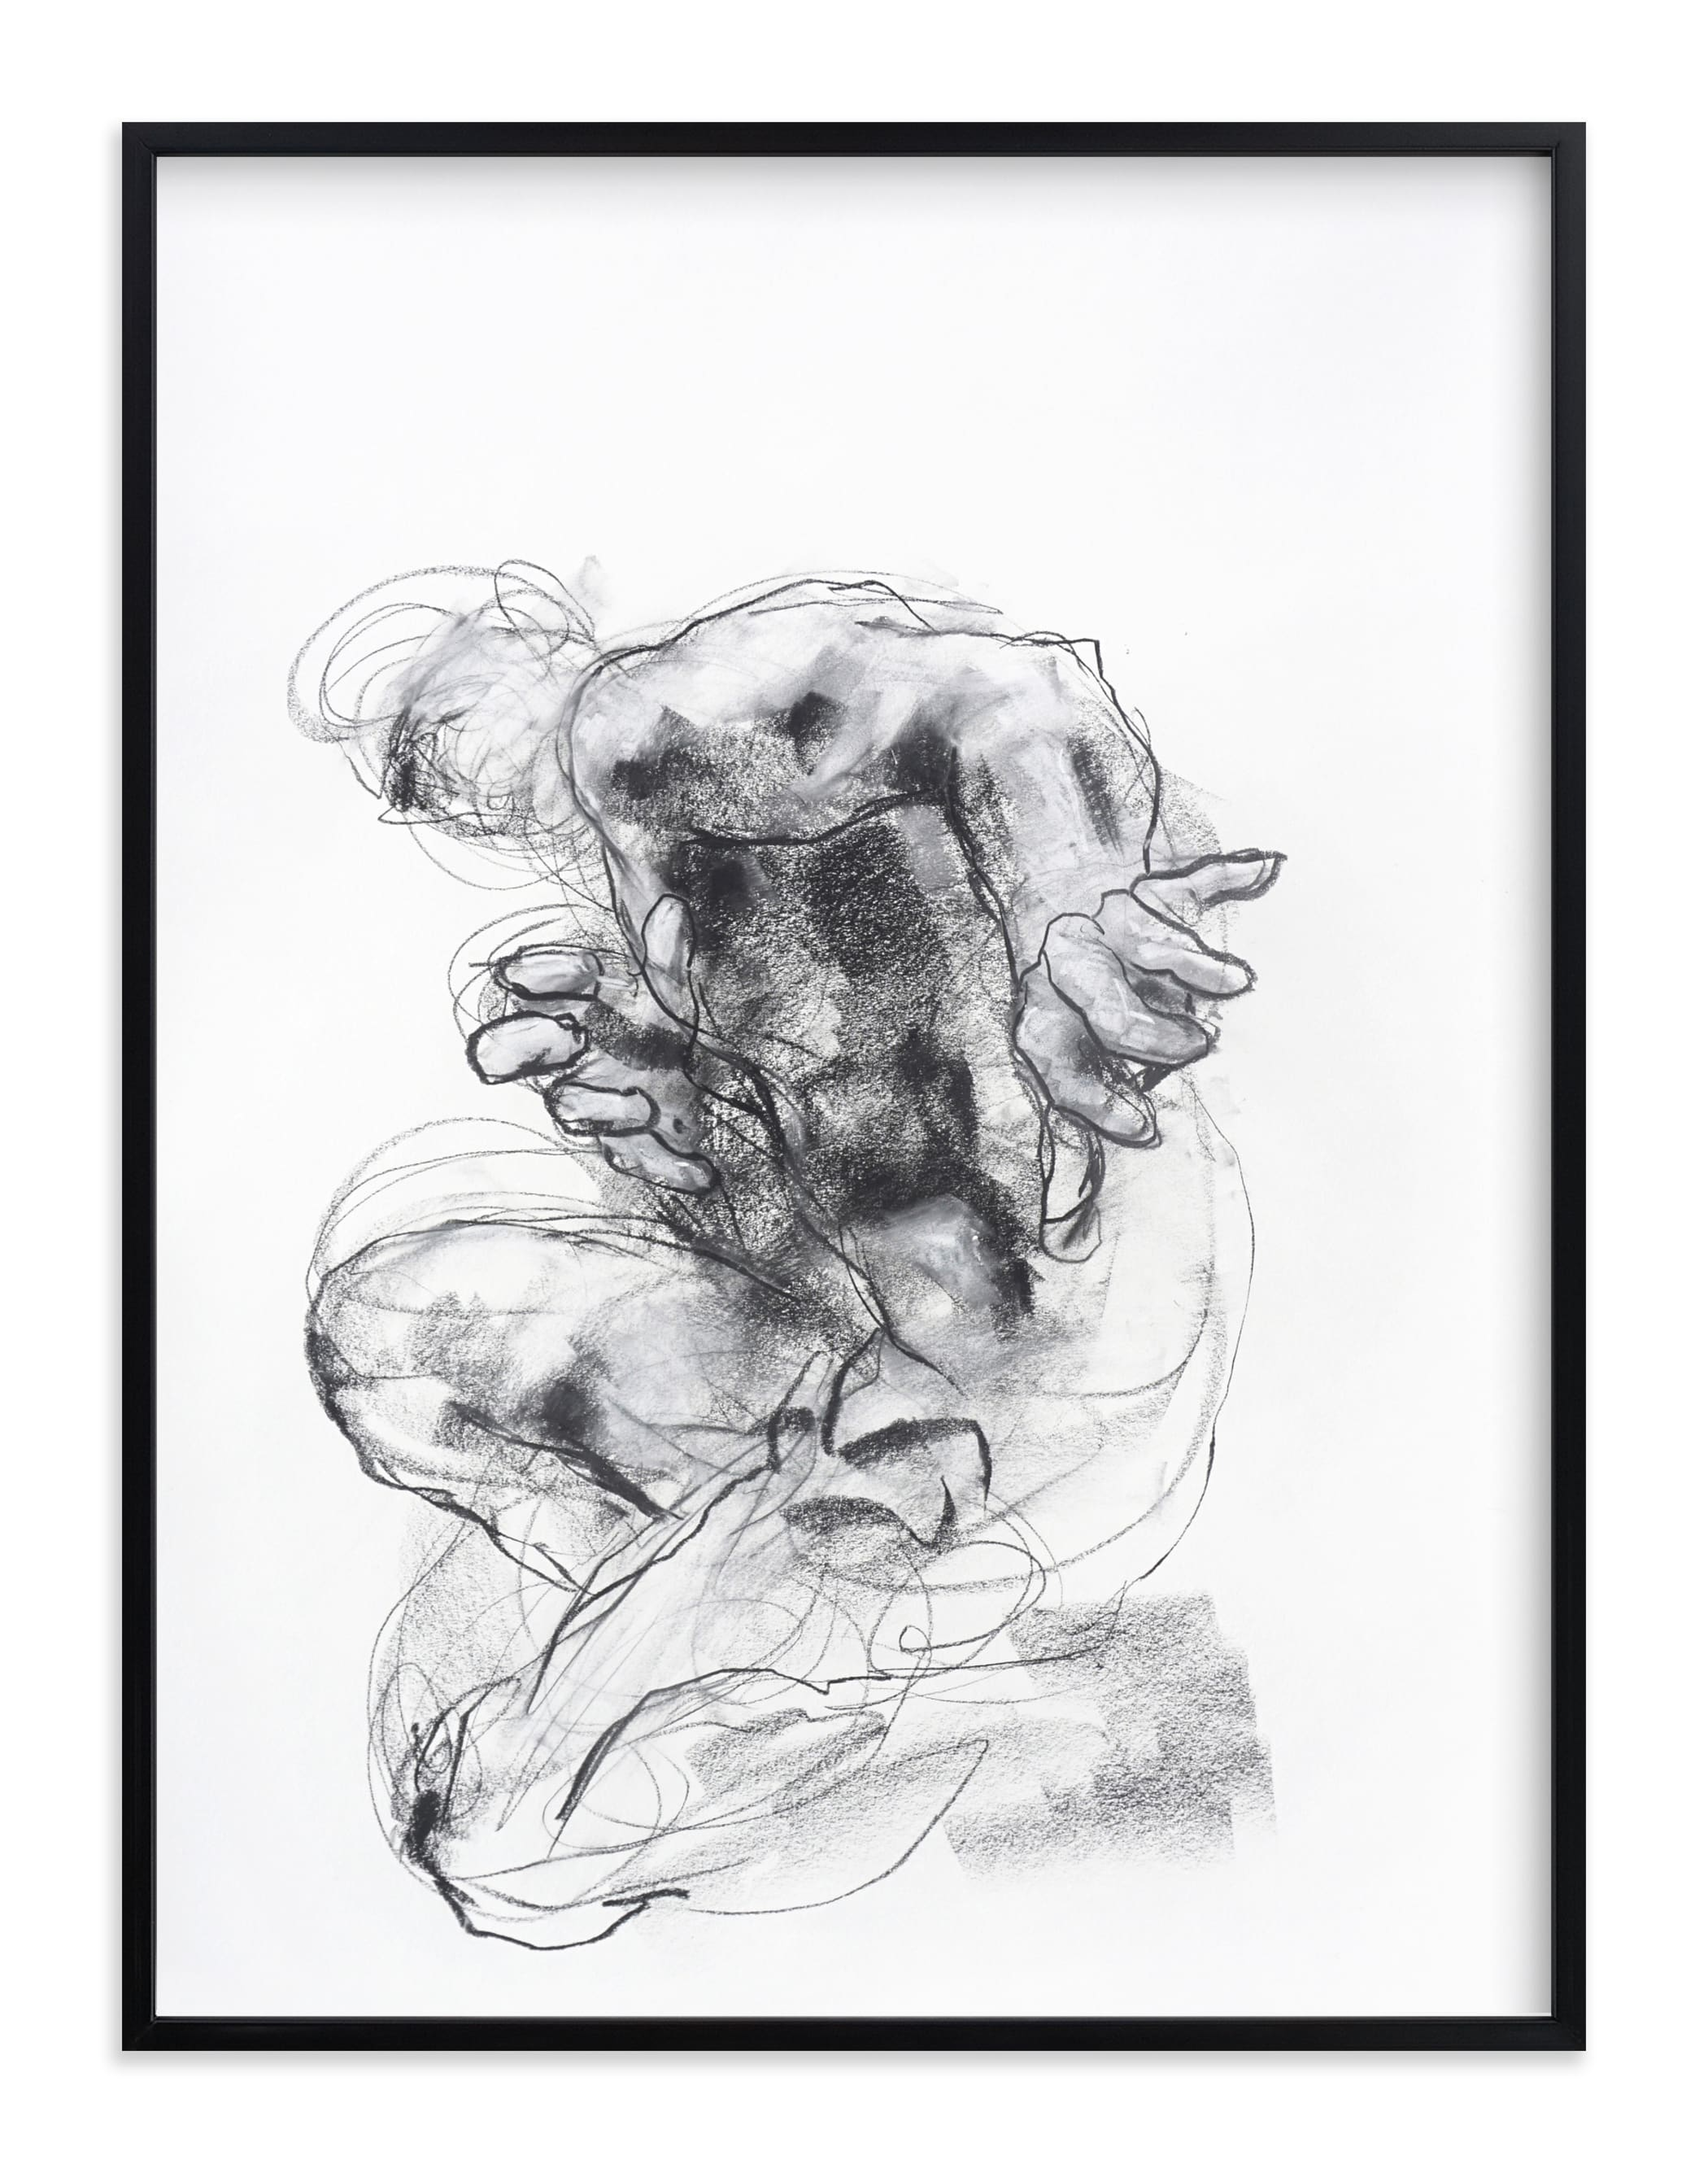 Drawing 538 - Crouching Figure Limited Edition Art Print - Minted